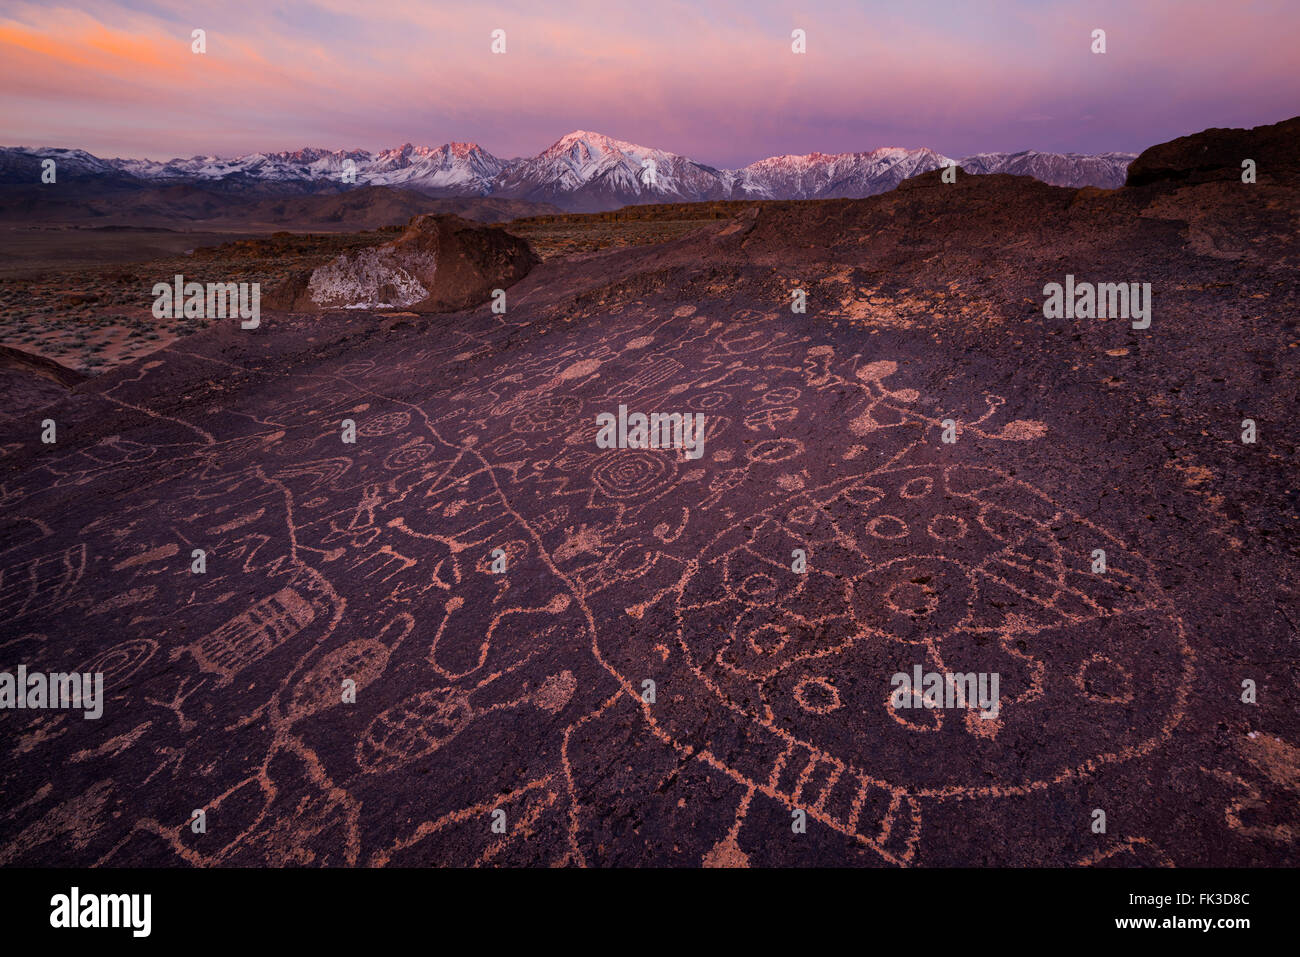 Sunrise at Sky Rock petroglyphs near Bishop in the Owens Valley area of California with the High Sierra in the background. These Stock Photo